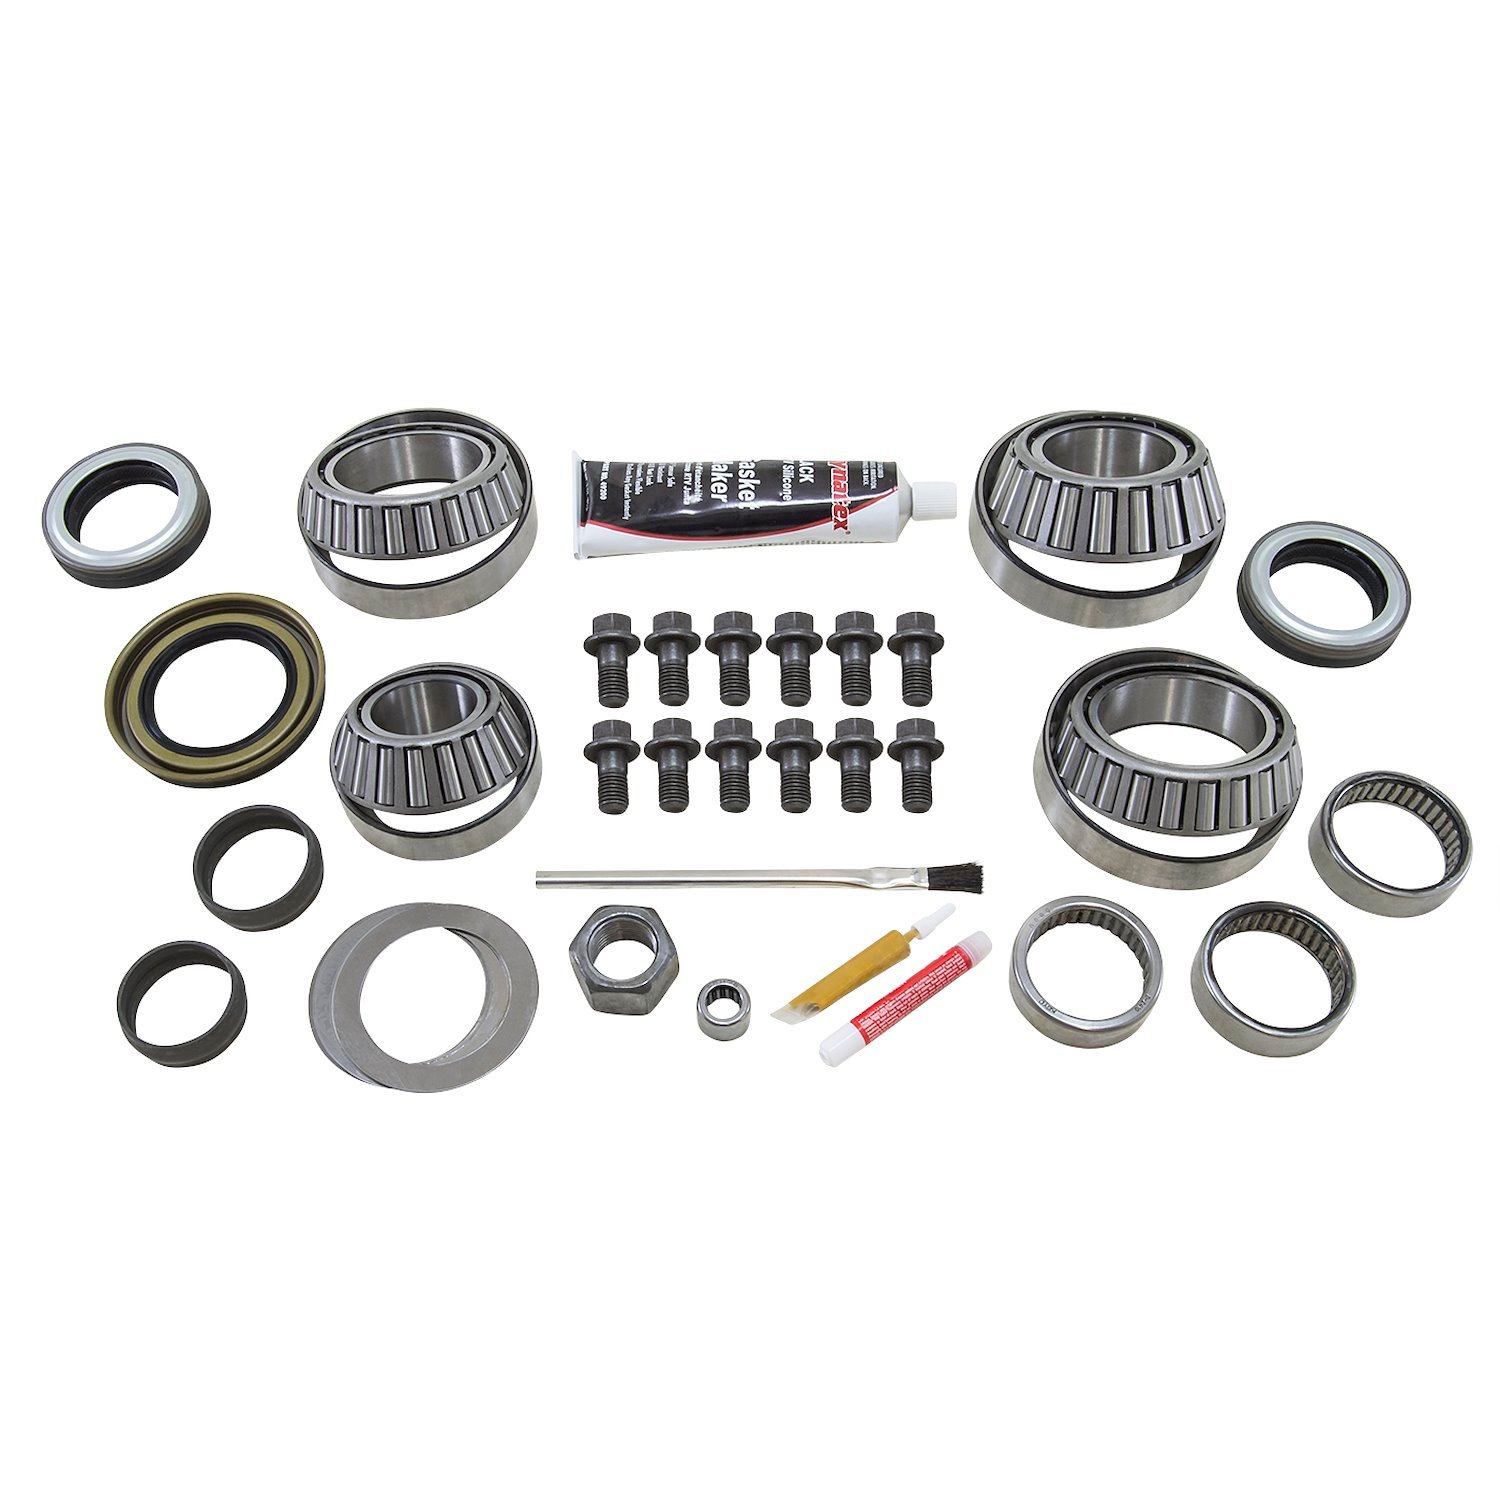 Master Overhaul Kit For Chrysler '00-Early '03 8 in. Ifs Differential